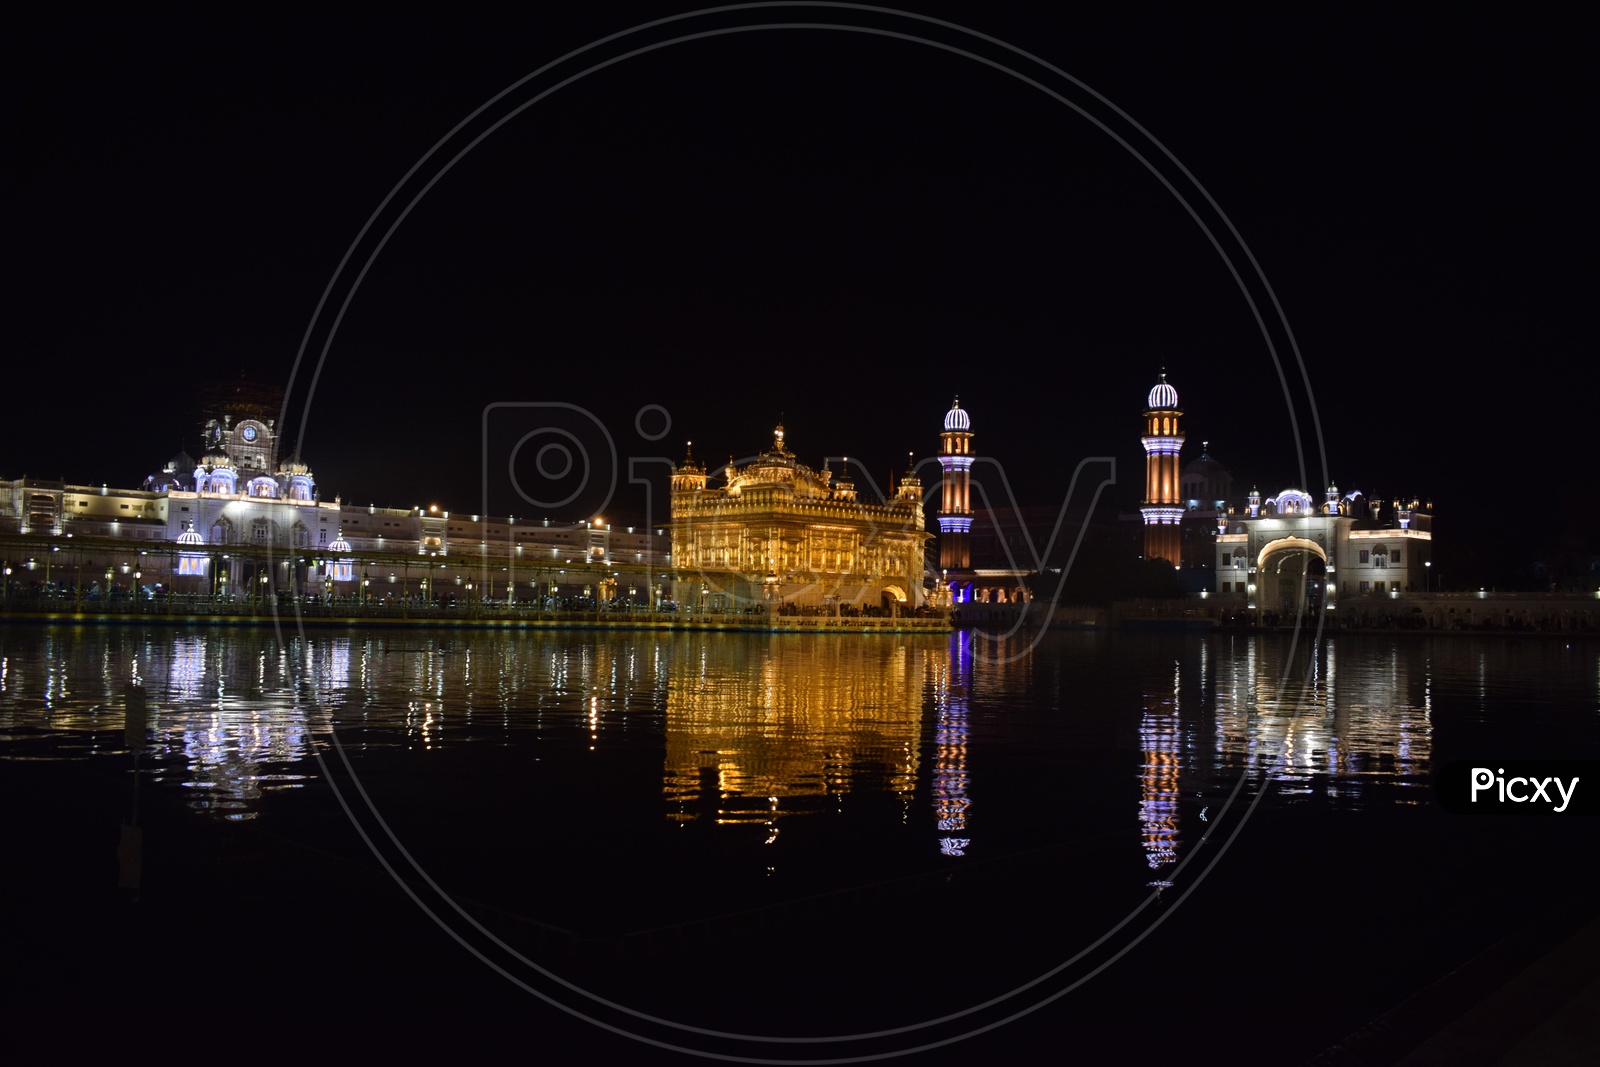 the Golden temple at night